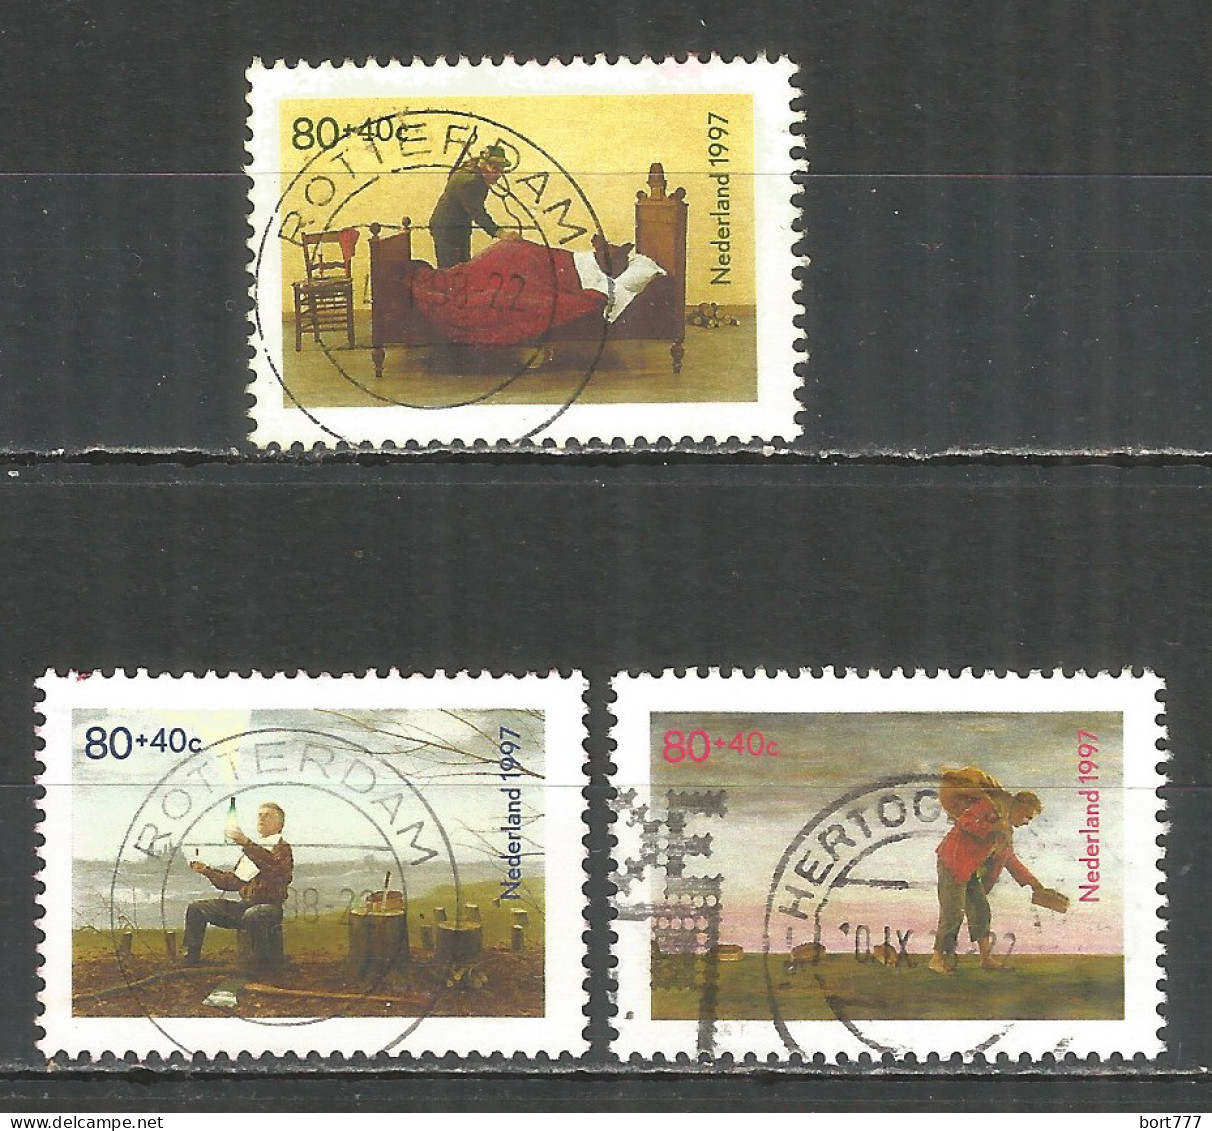 Netherlands 1997 Year, Used Stamps ,Mi 1632-34 - Used Stamps